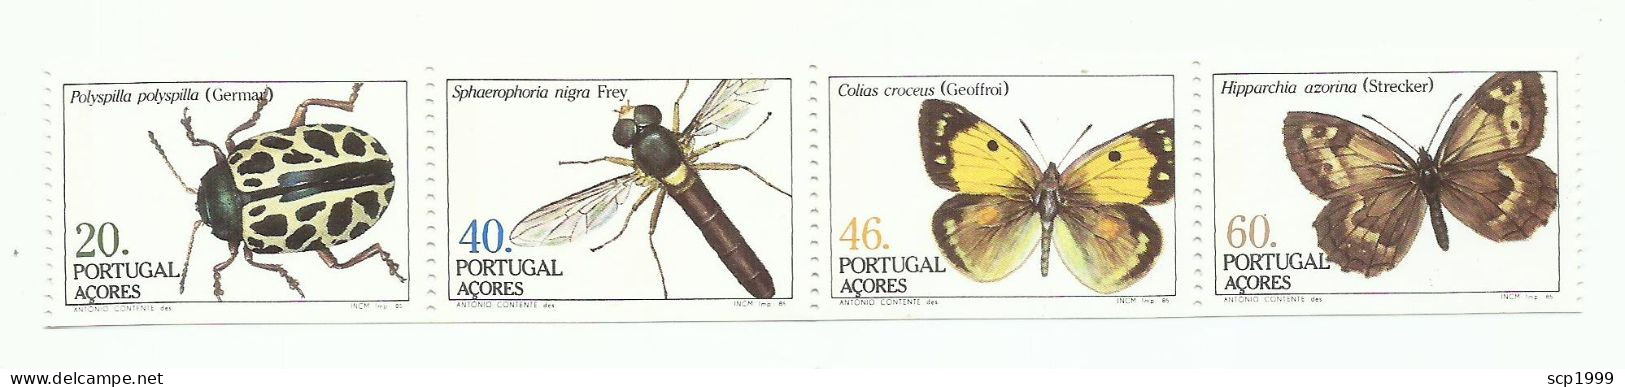 Portugal 1985 - Azores Insects Booklet MNH - Libretti